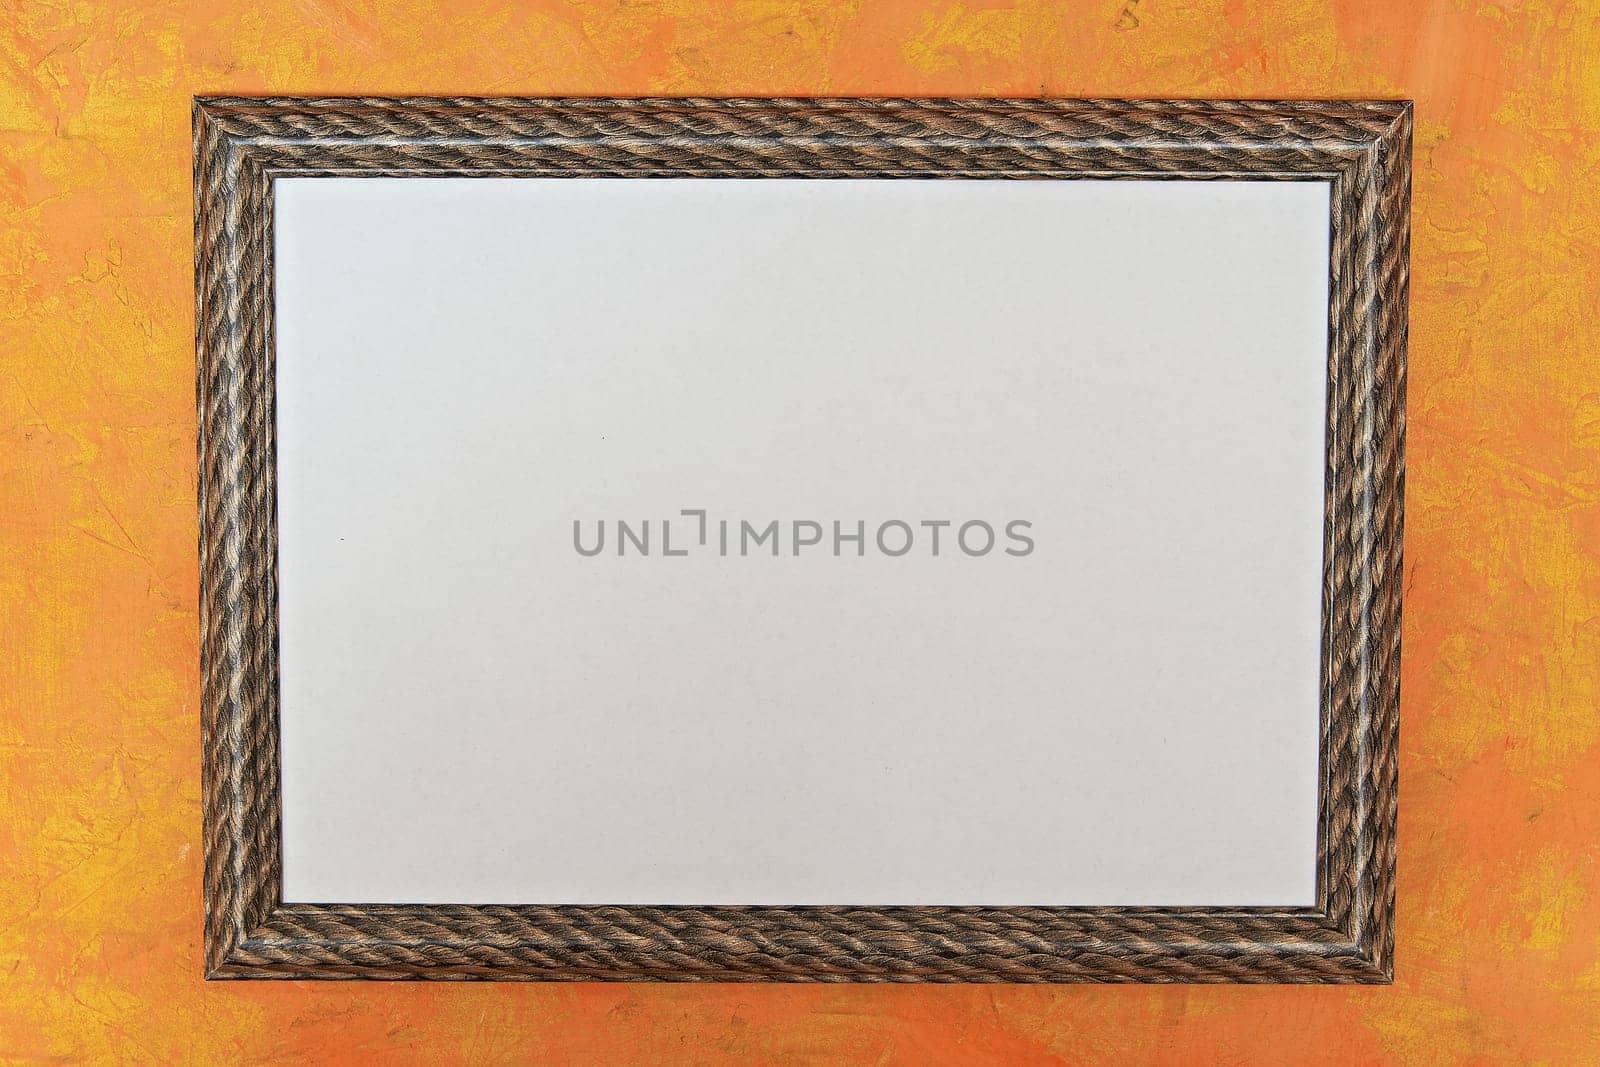 wooden photo frame with a white image on a bright orange background